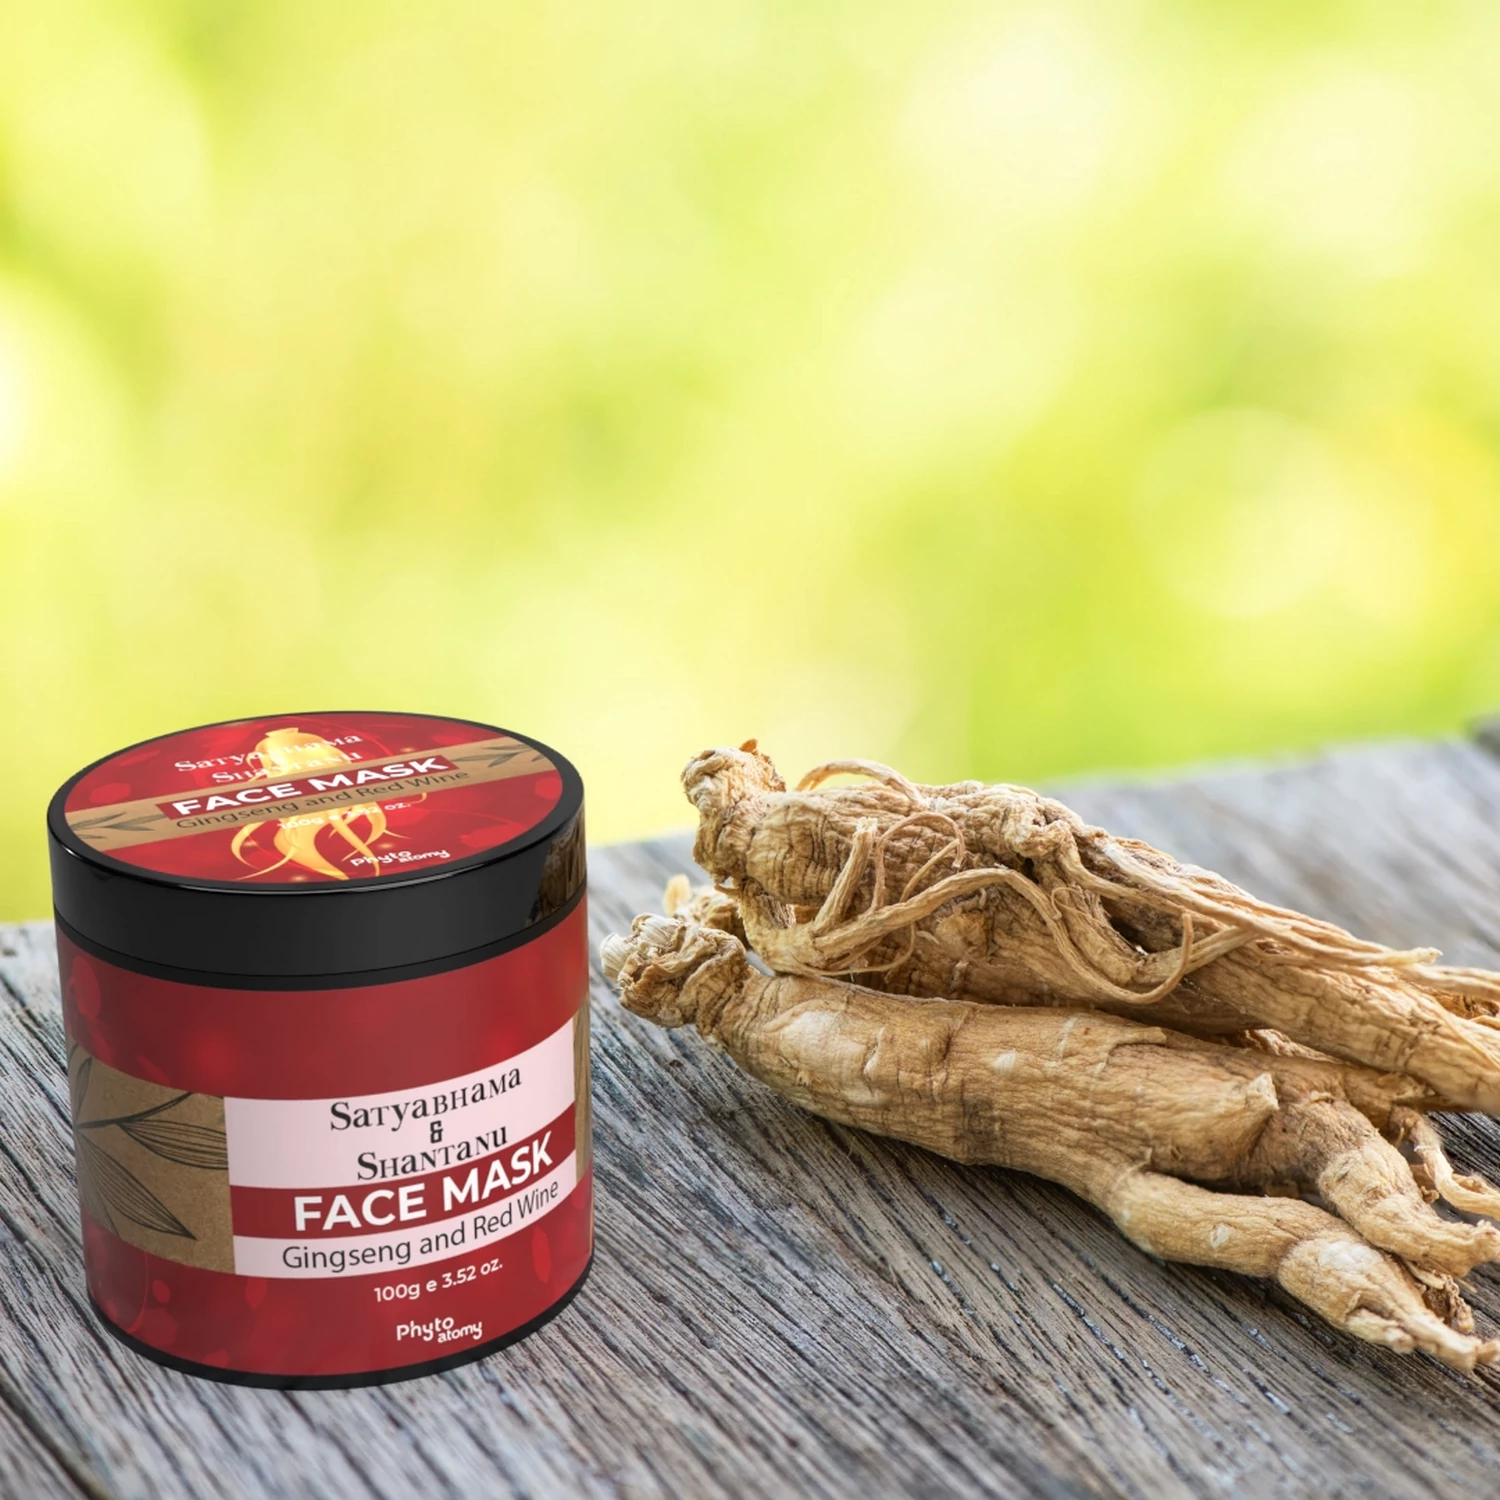 Gingseng and Red Wine Face Mask (100g)